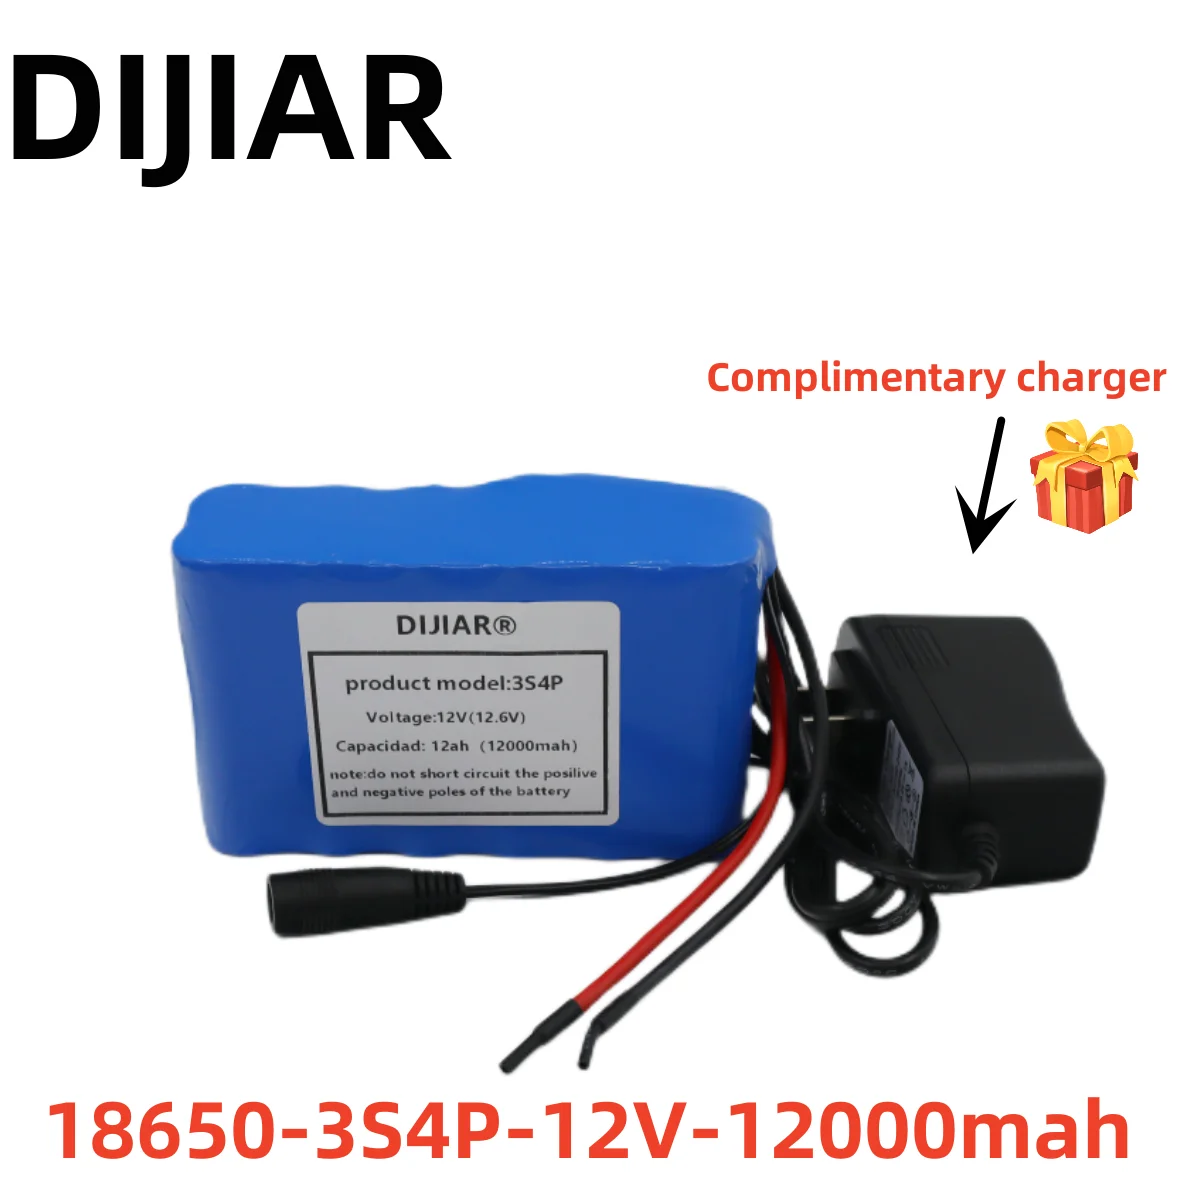 

3s4p 12V 12Ah battery pack 18650 lithium ion 12V 12000mAh DC12.6V super large capacity rechargeable battery with BMS + charger